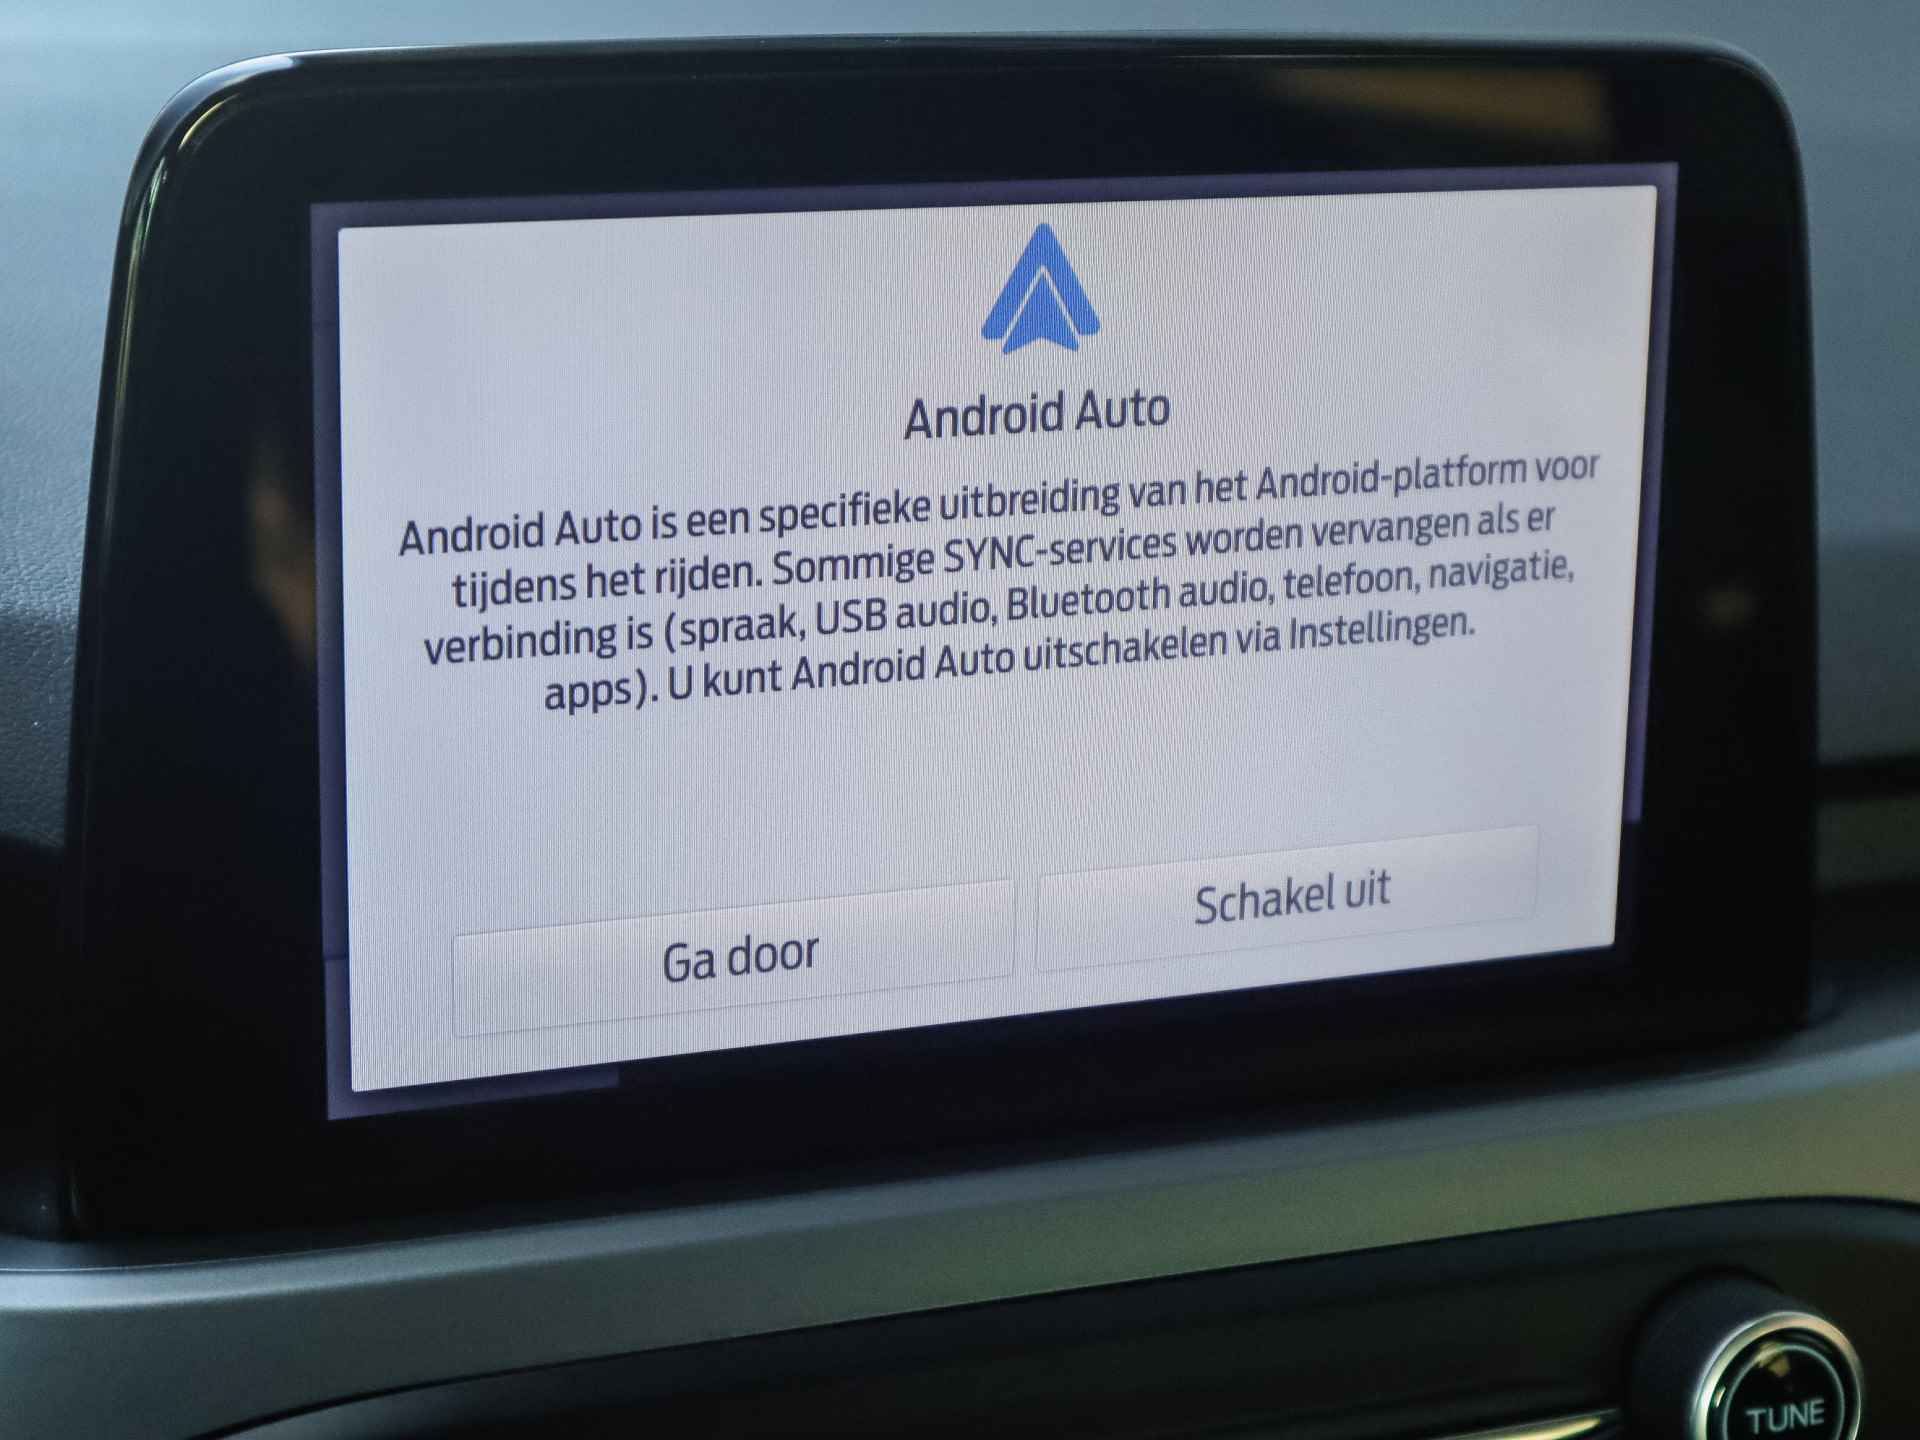 Ford Focus 1.0i Hybrid Connected, (149PK) 1e-Eig, Ford-Dealer-Onderh, 12-Mnd-BOVAG, NL-Auto, Navigatie/Apple-Carplay/Android-Auto, Parkeersensoren-V+A, Cruise-Control, Airco, DAB, Lane-Assist, Privacy-Glas, Sportstoelen, Led-Koplampen, Adaptieve-Cruise-Control - 18/55